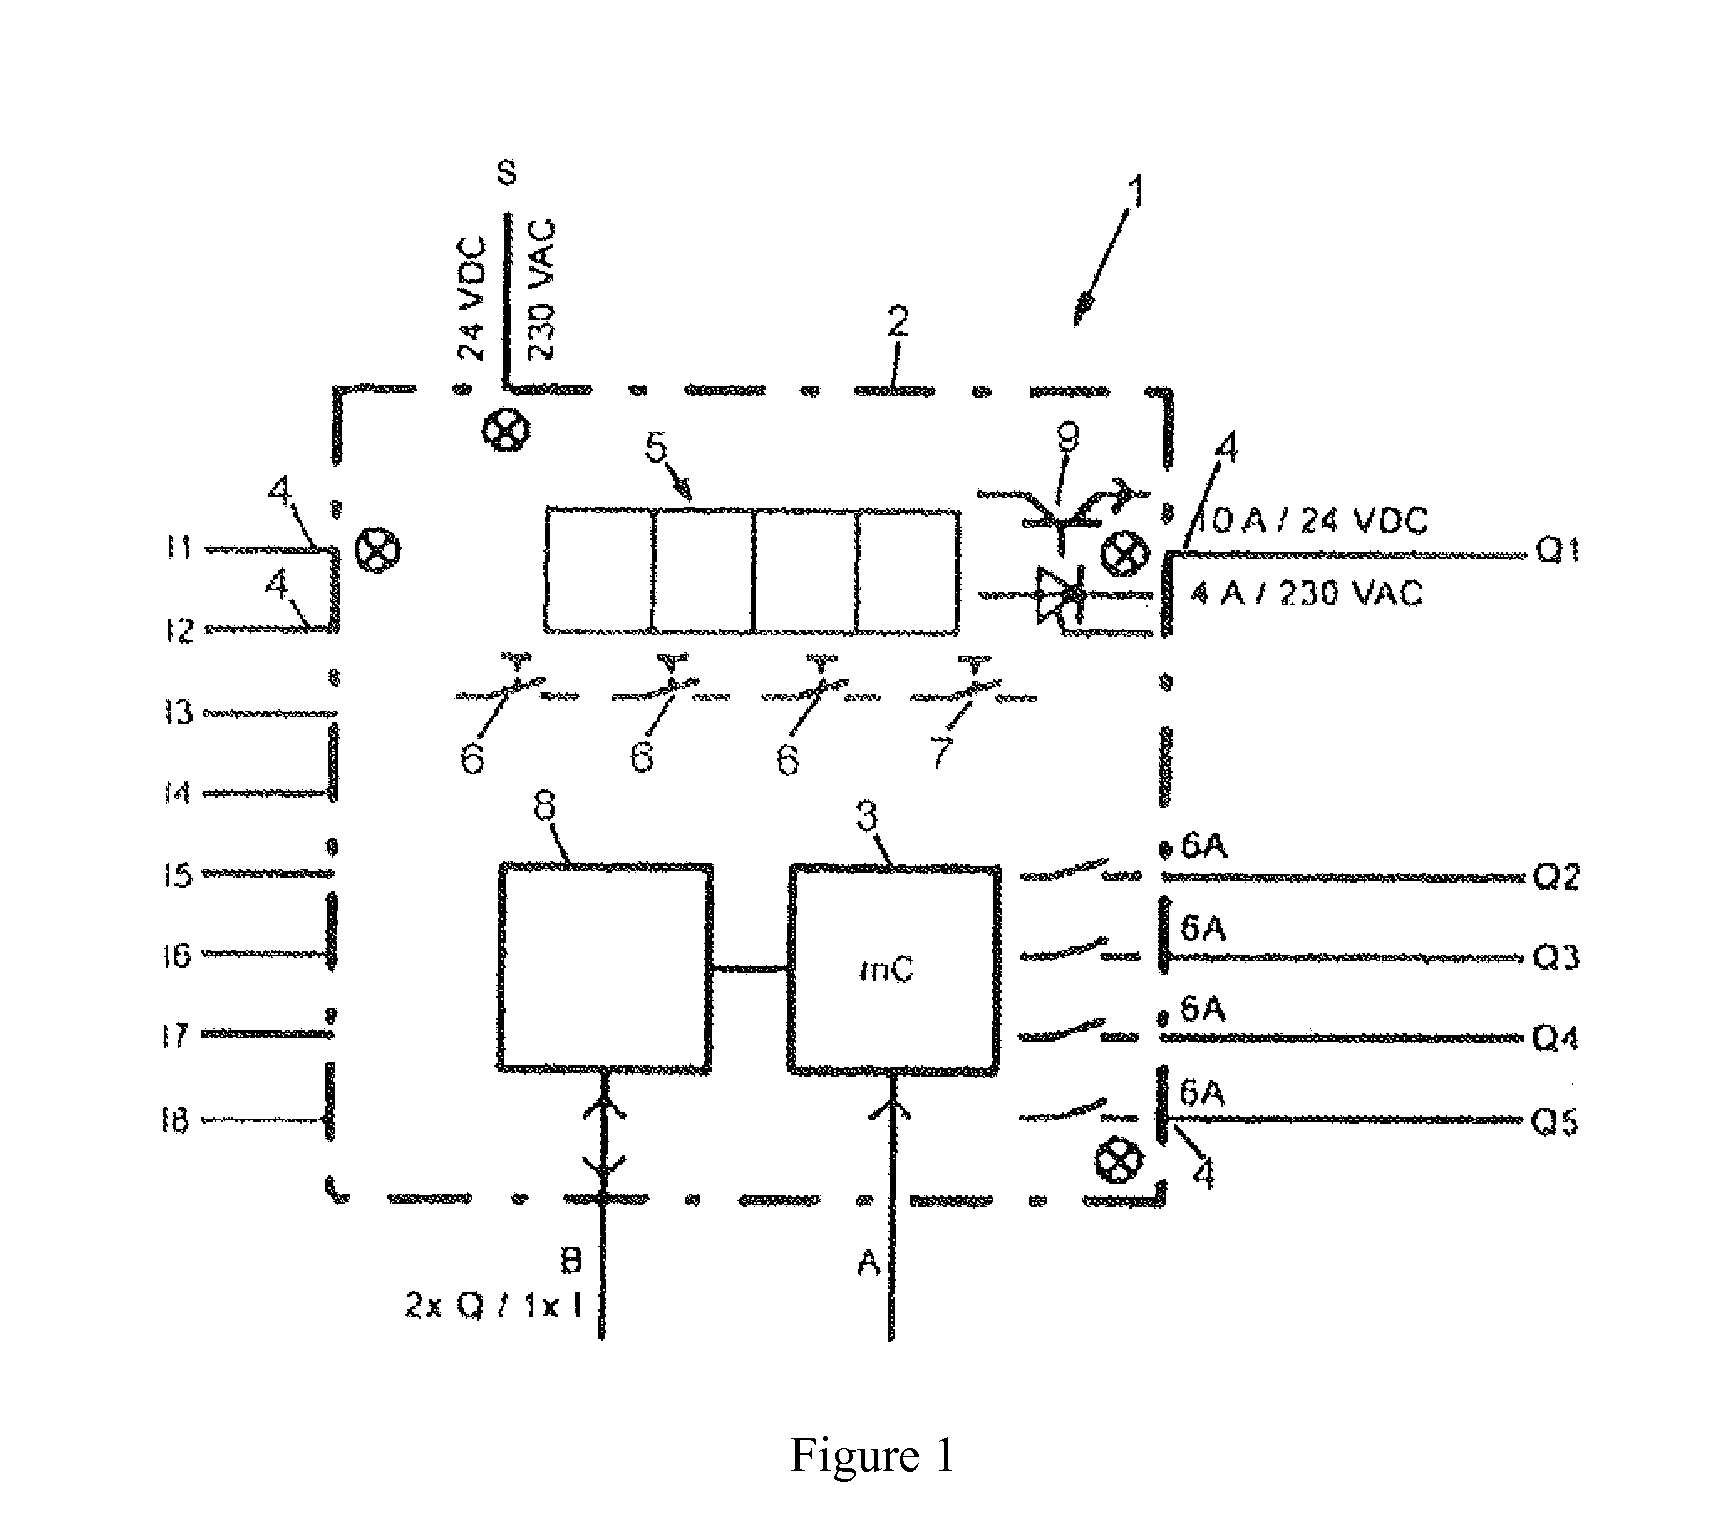 Control device for lubrication systems